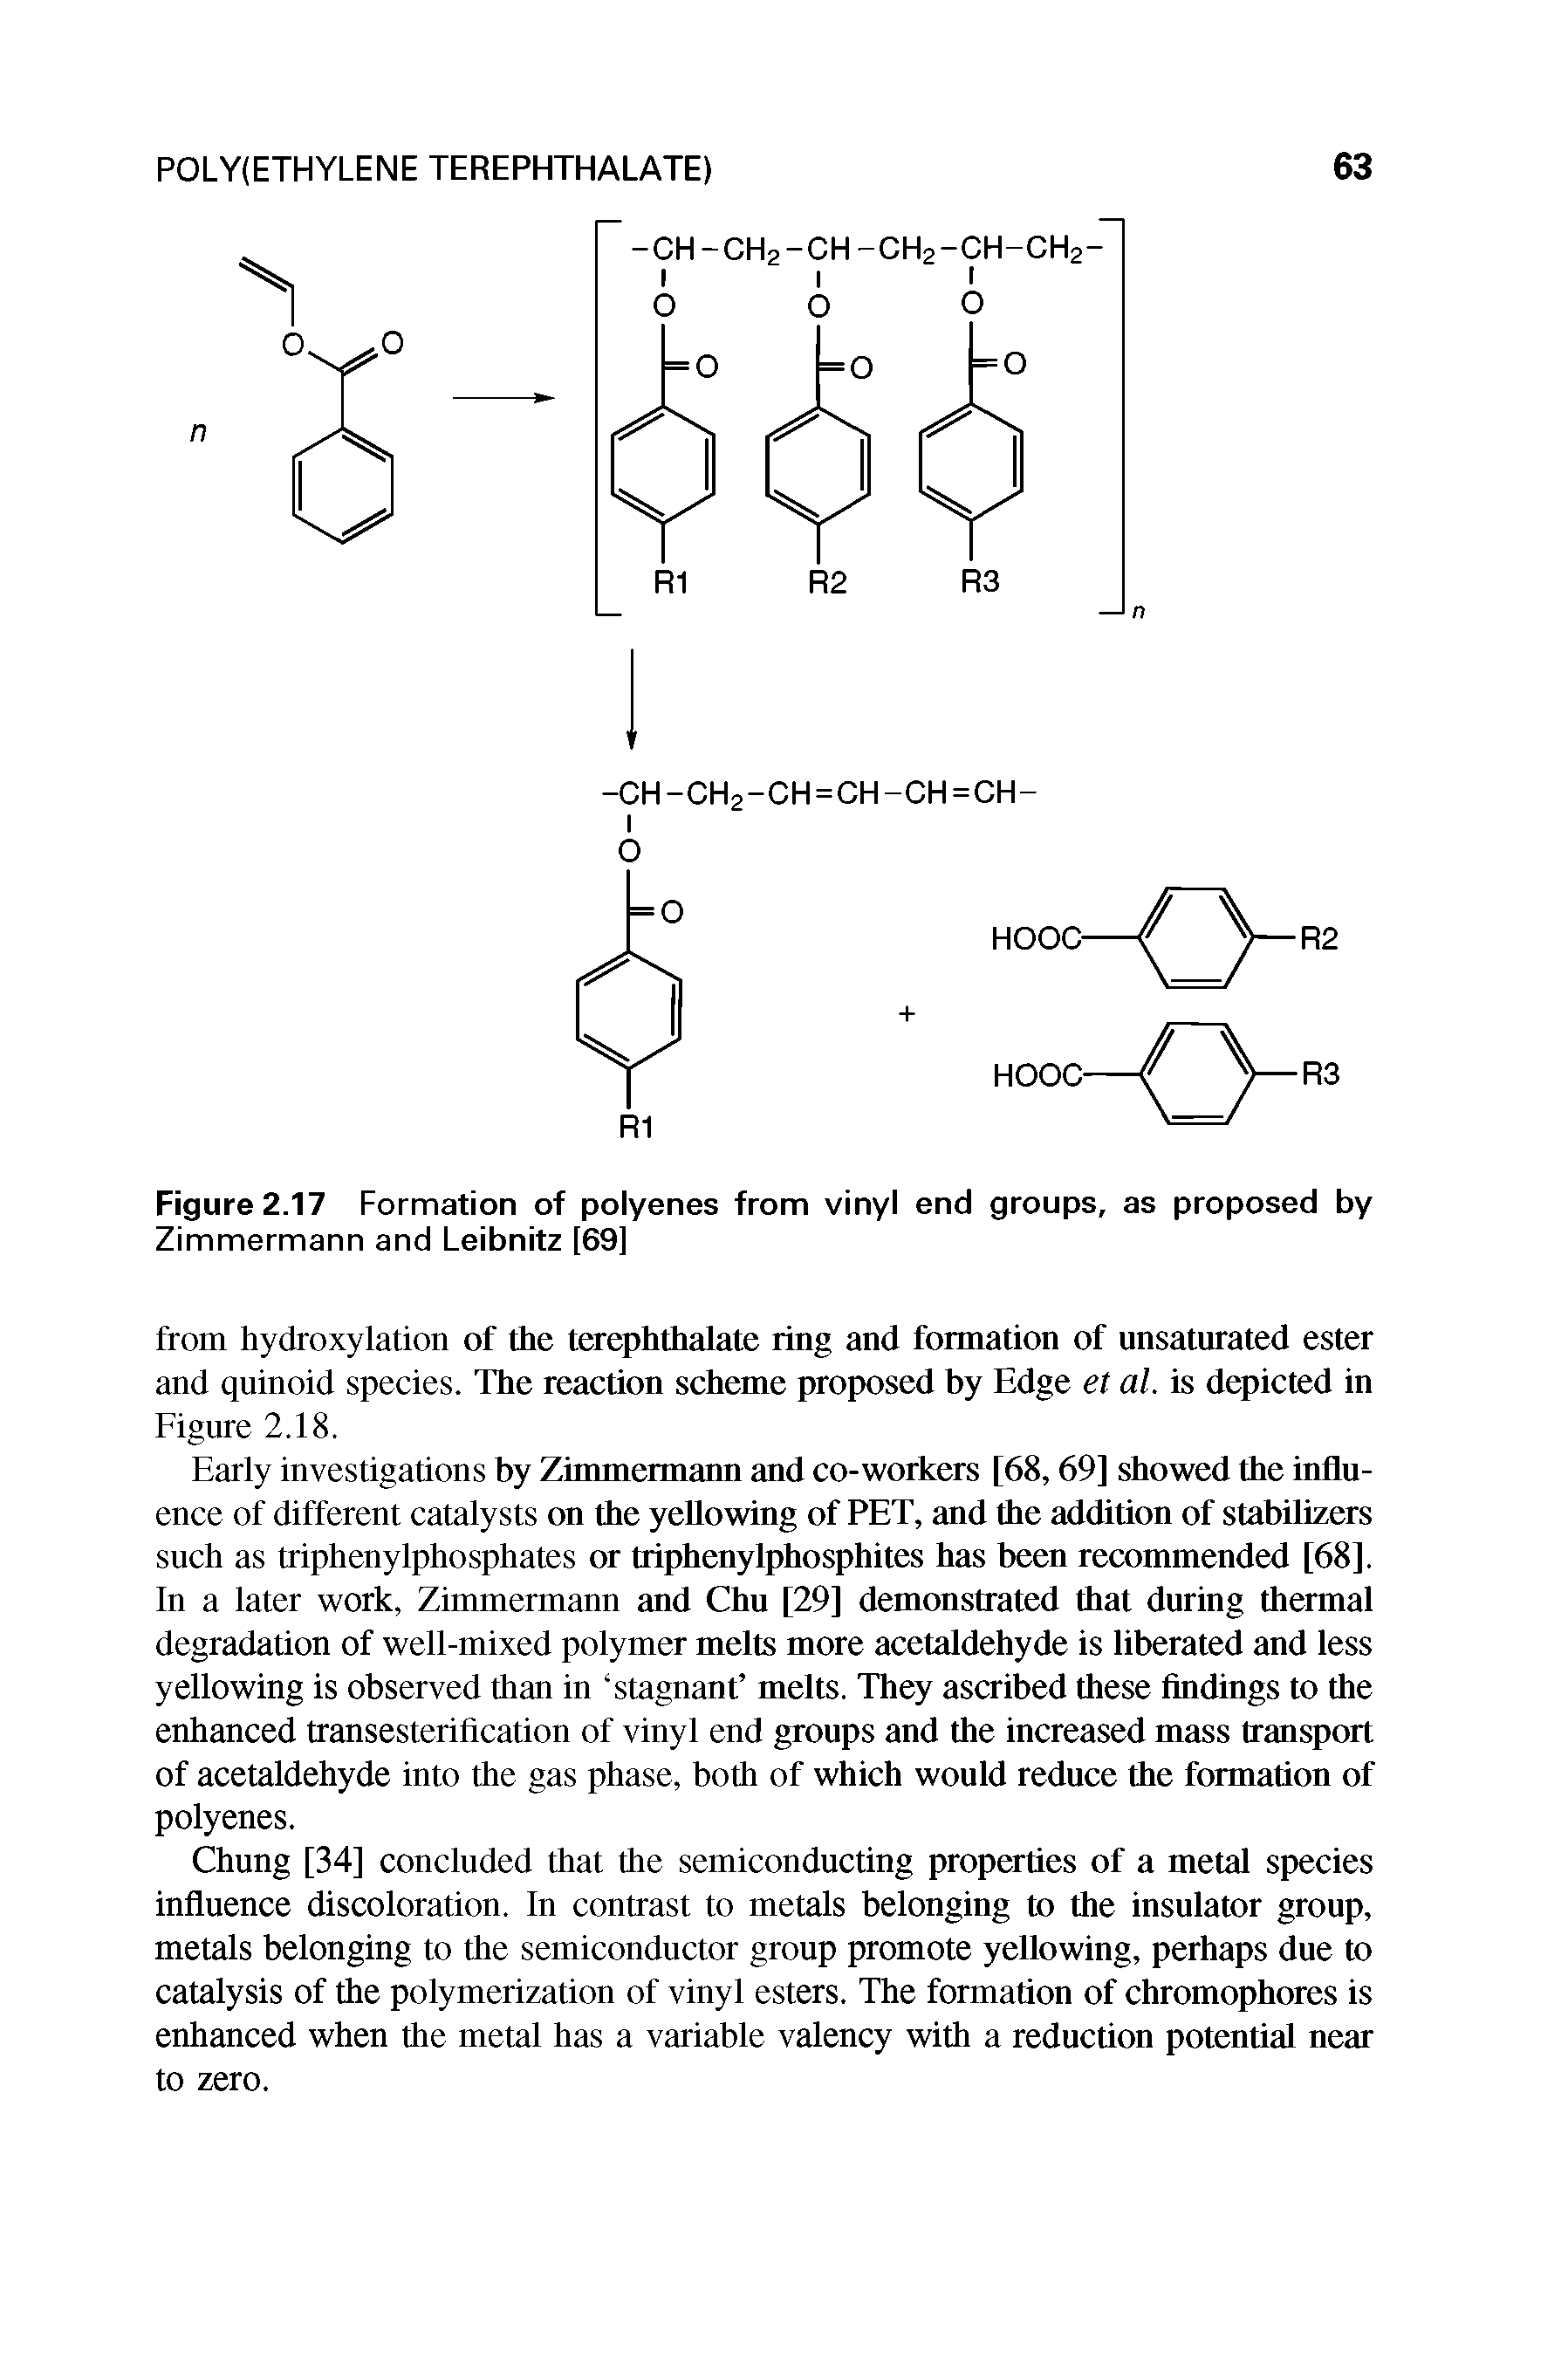 Figure 2.17 Formation of polyenes from vinyl end groups, as proposed by Zimmermann and Leibnitz [69]...